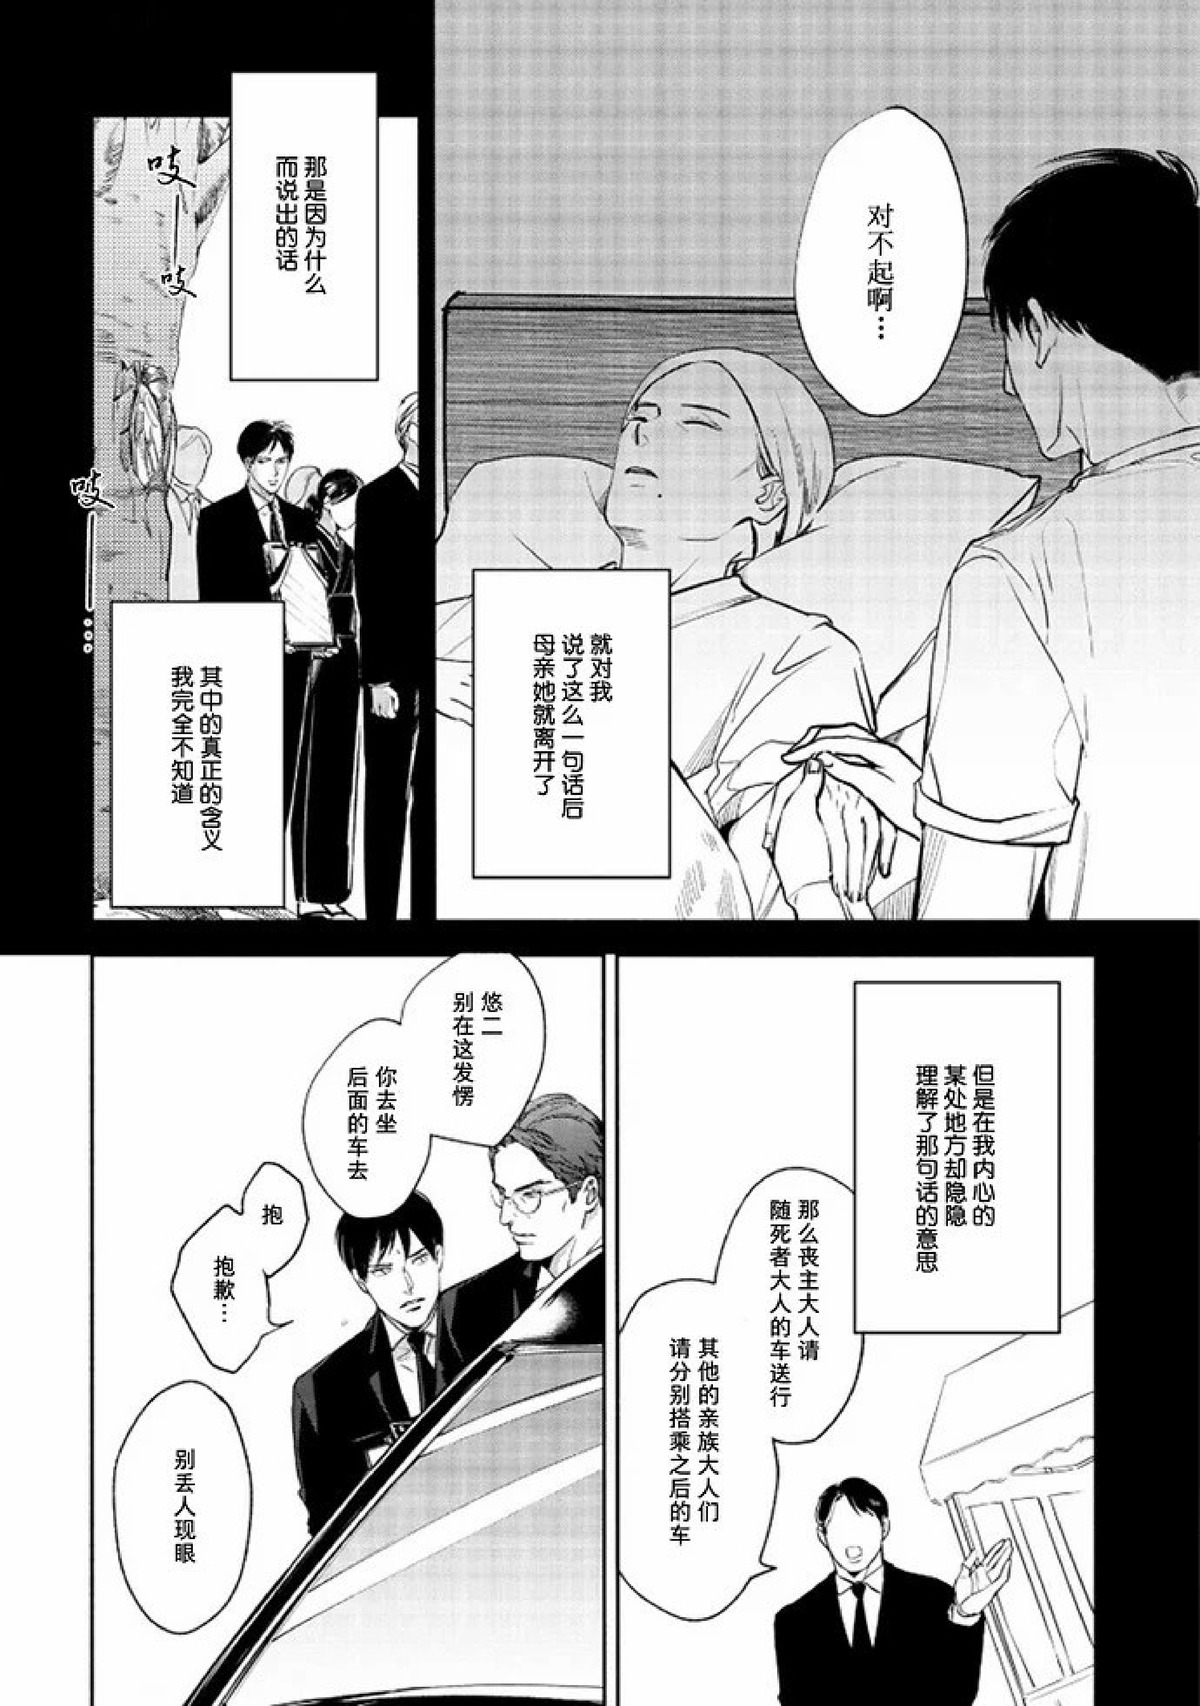 【Two sides of the same coin[耽美]】漫画-（上卷01-02）章节漫画下拉式图片-14.jpg